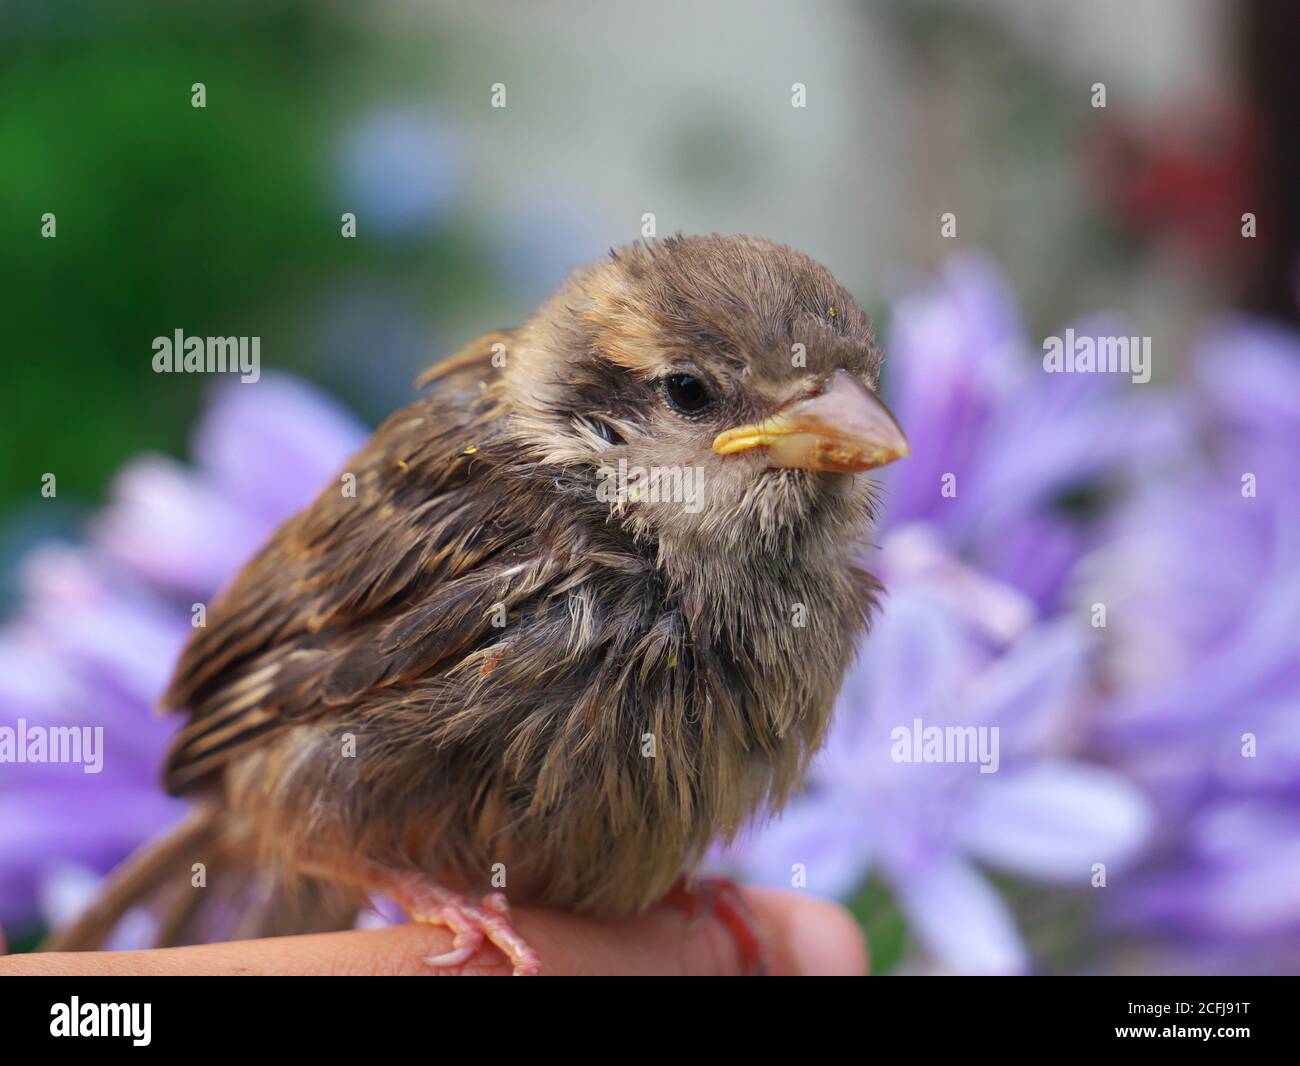 Close-up of a baby sparrow with an agapante blue flower in the background. Stock Photo